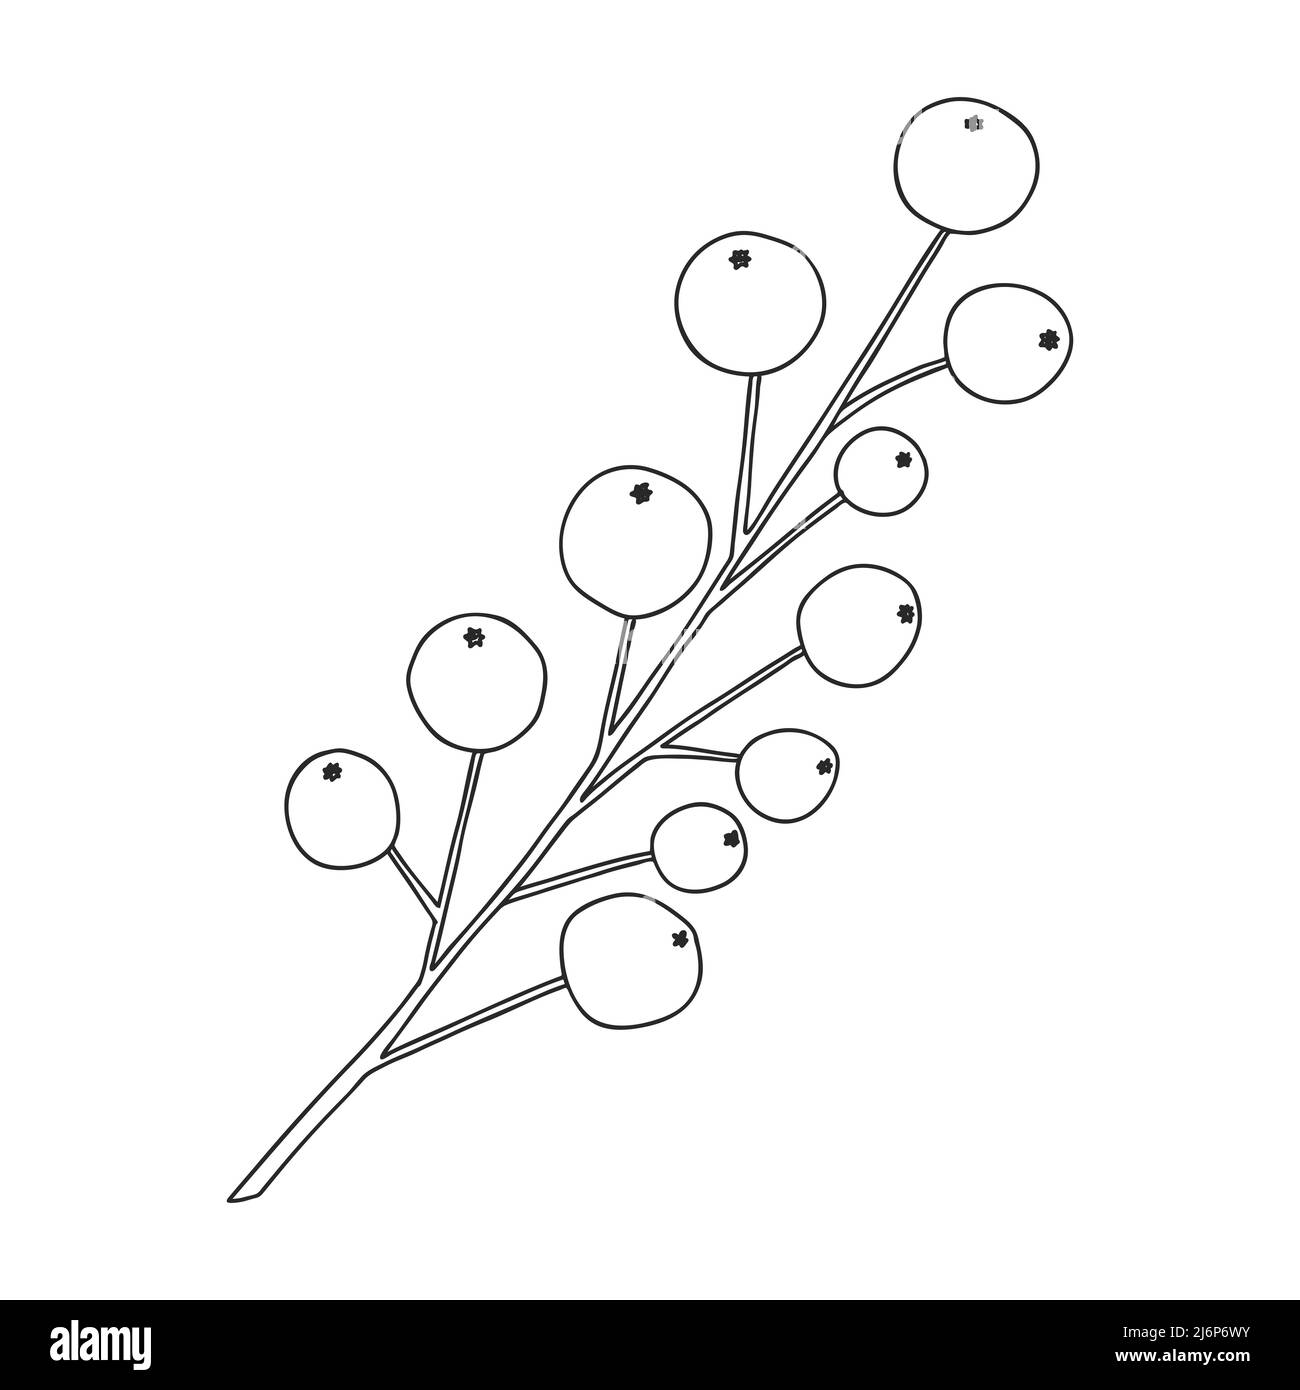 Branch of plant with berries. Botanical design element for the design of magazines,menus and recipes. Simple black and white vector illustration drawn Stock Vector